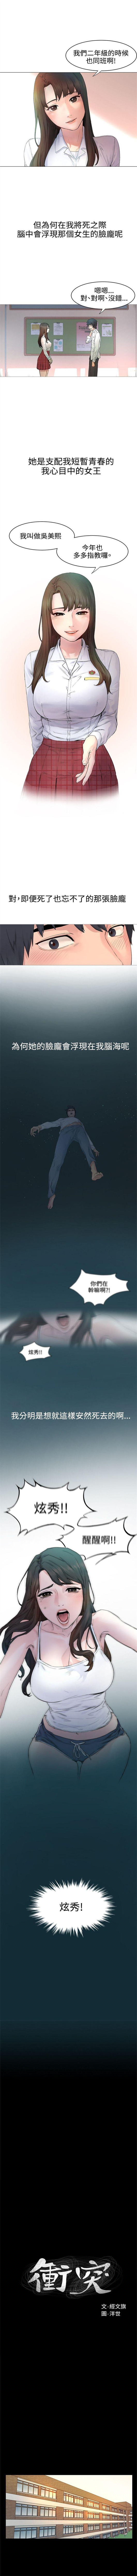 Point Of View 衝突 1-97 官方中文（連載中）  - Page 3